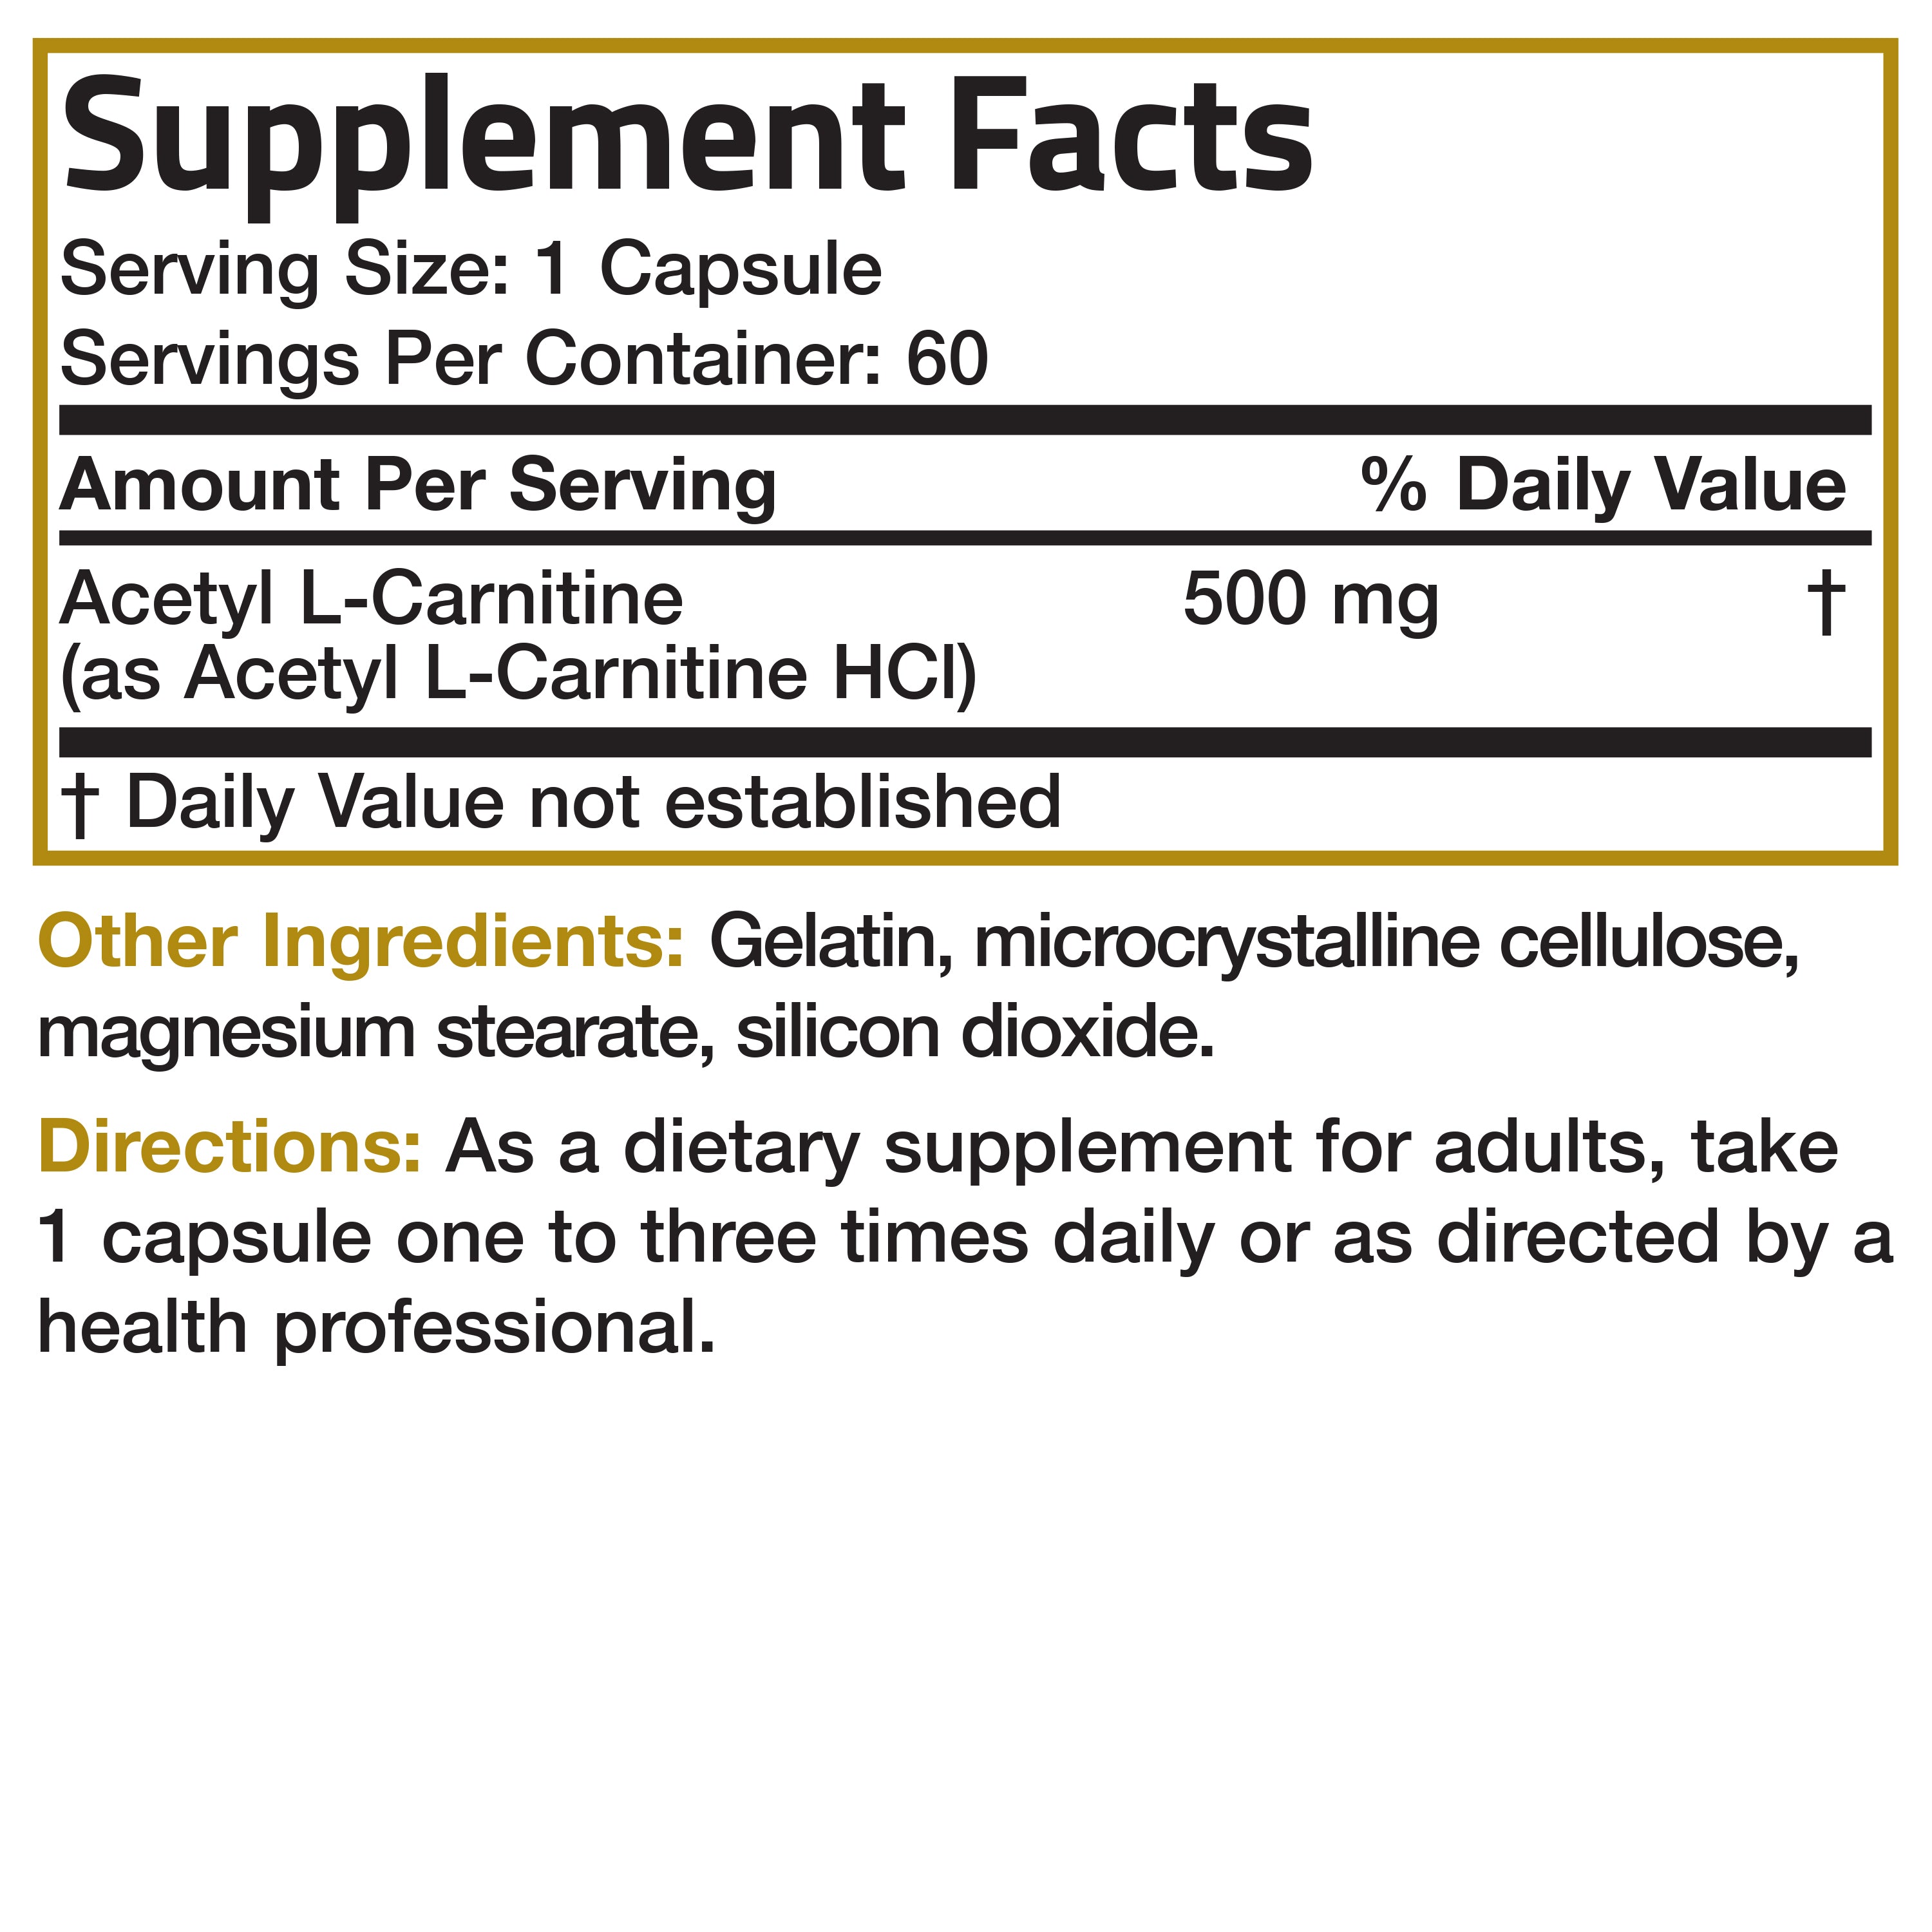 Acetyl L-Carnitine - 500 MG view 4 of 4